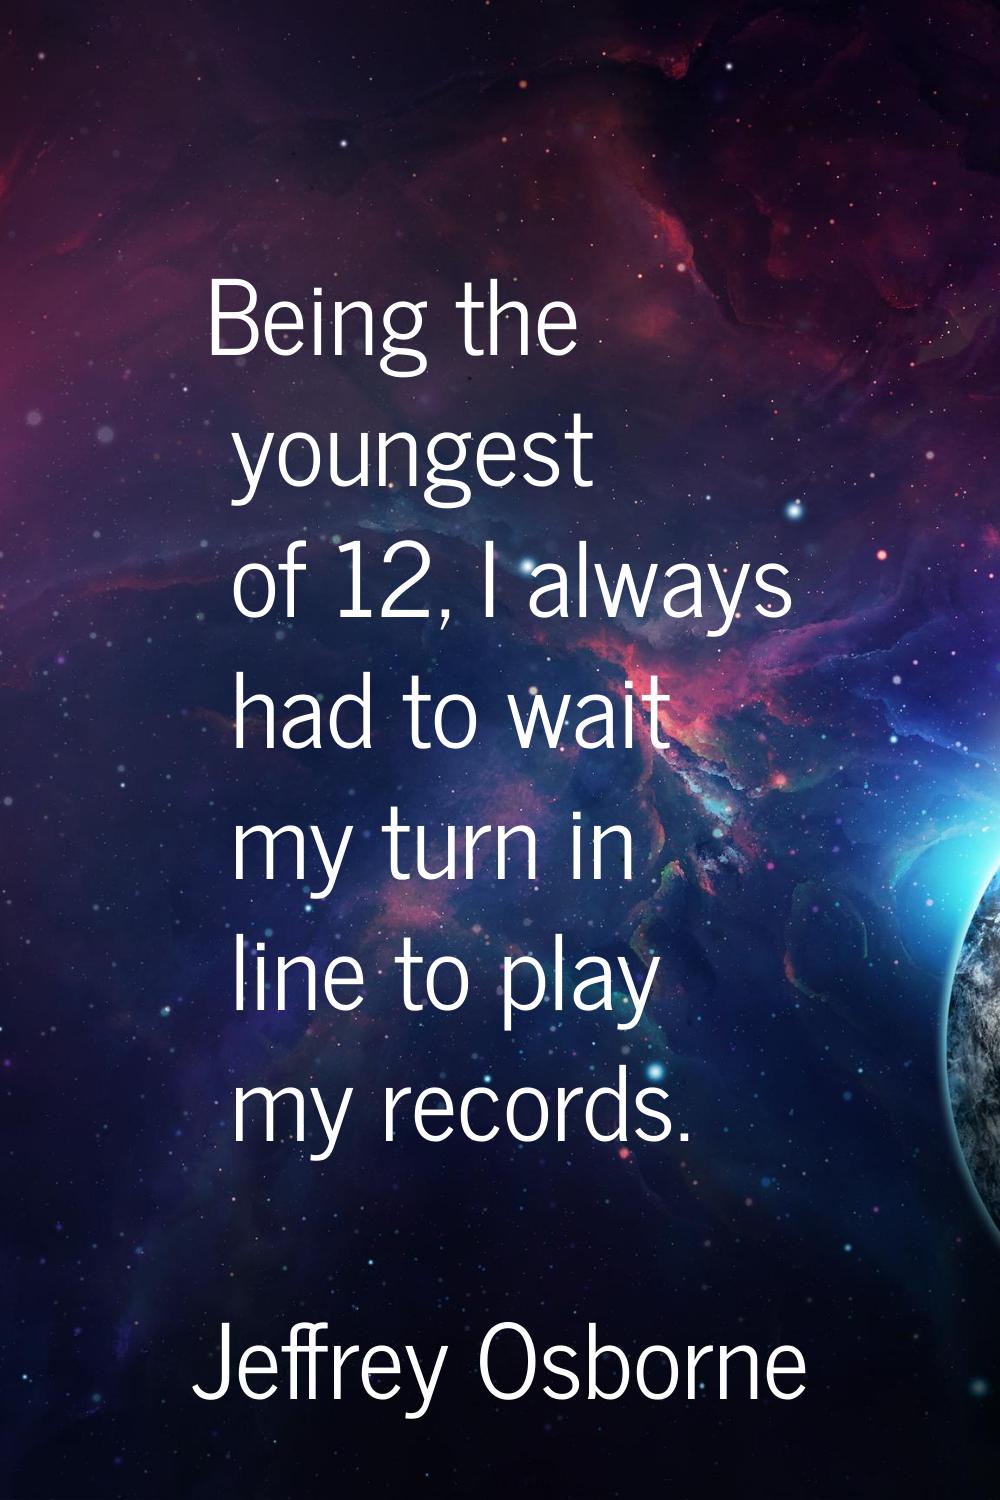 Being the youngest of 12, I always had to wait my turn in line to play my records.